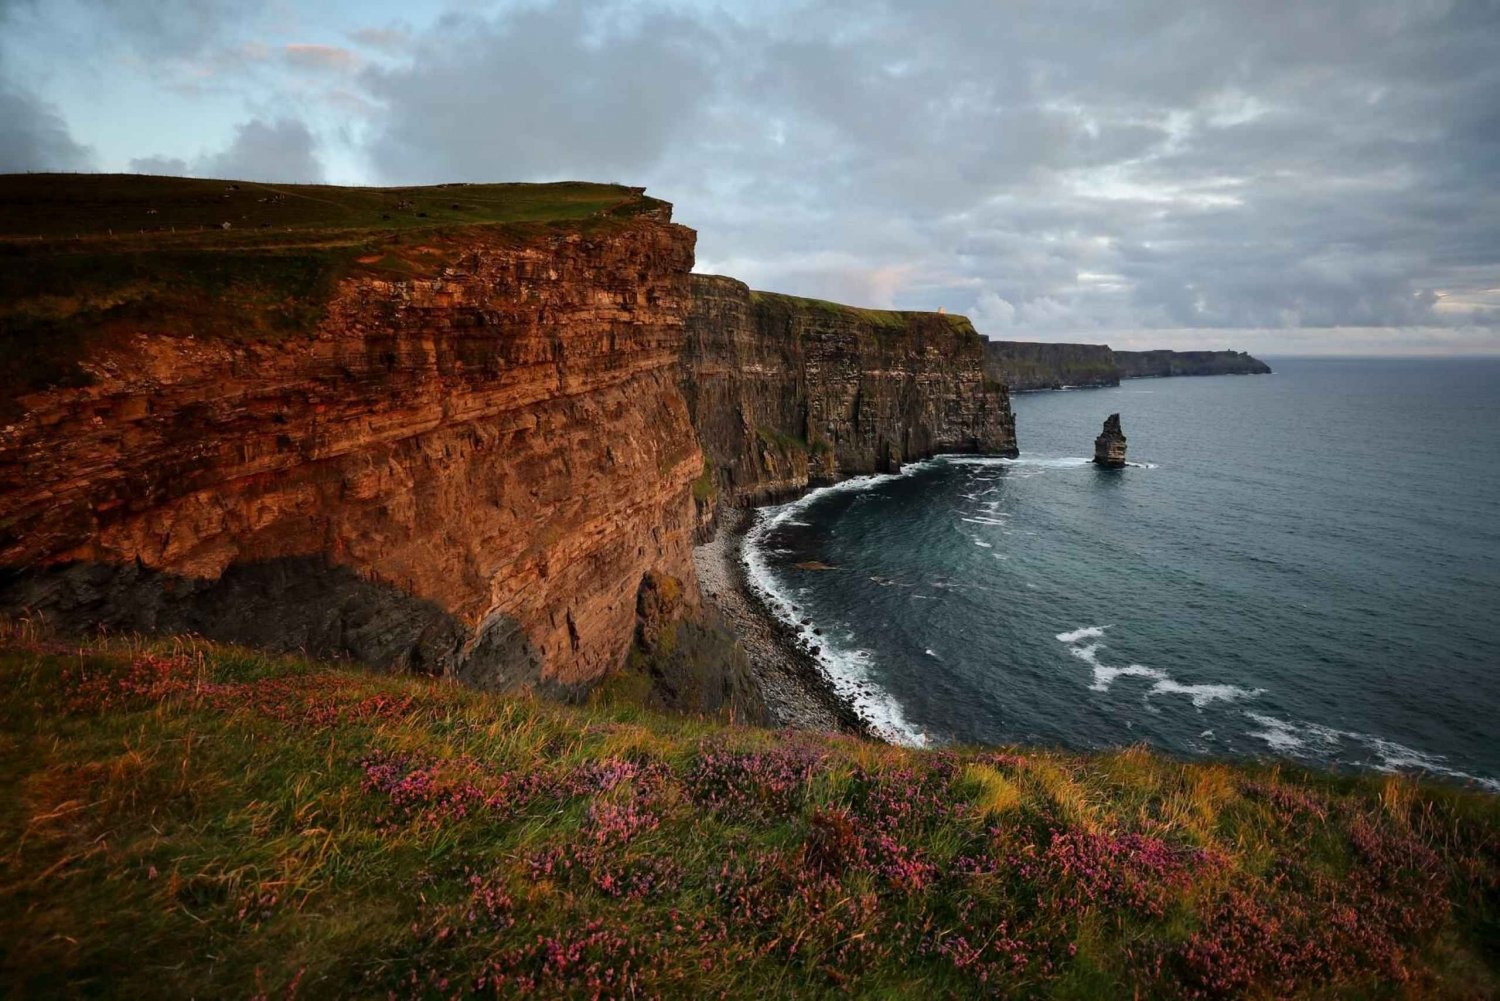 Cliffs of Moher: Private Luxustour ab Dublin